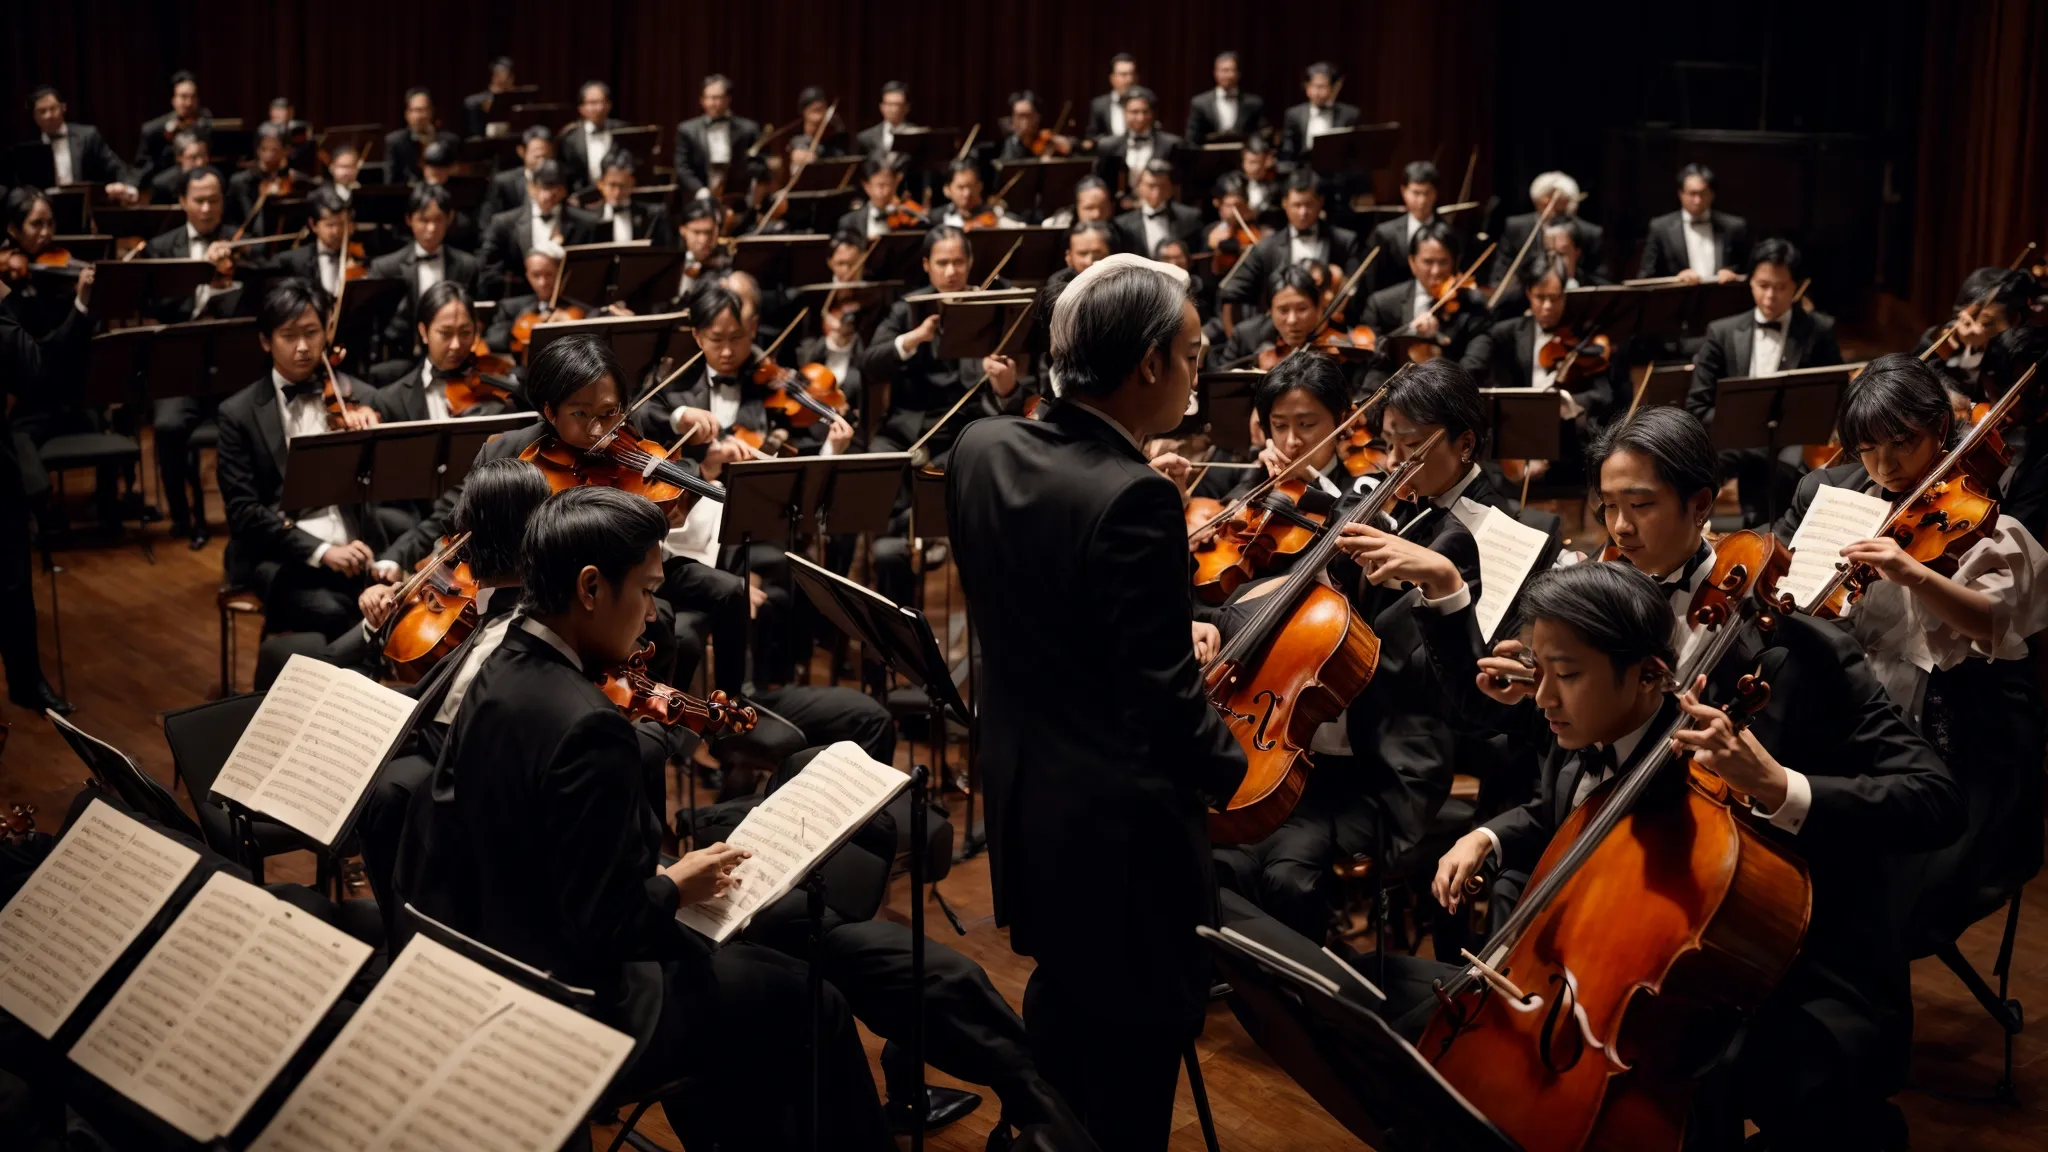 a symphony conductor leads an orchestra, each musician vividly playing different instruments representing the diverse financial notes in the world of note brokering.